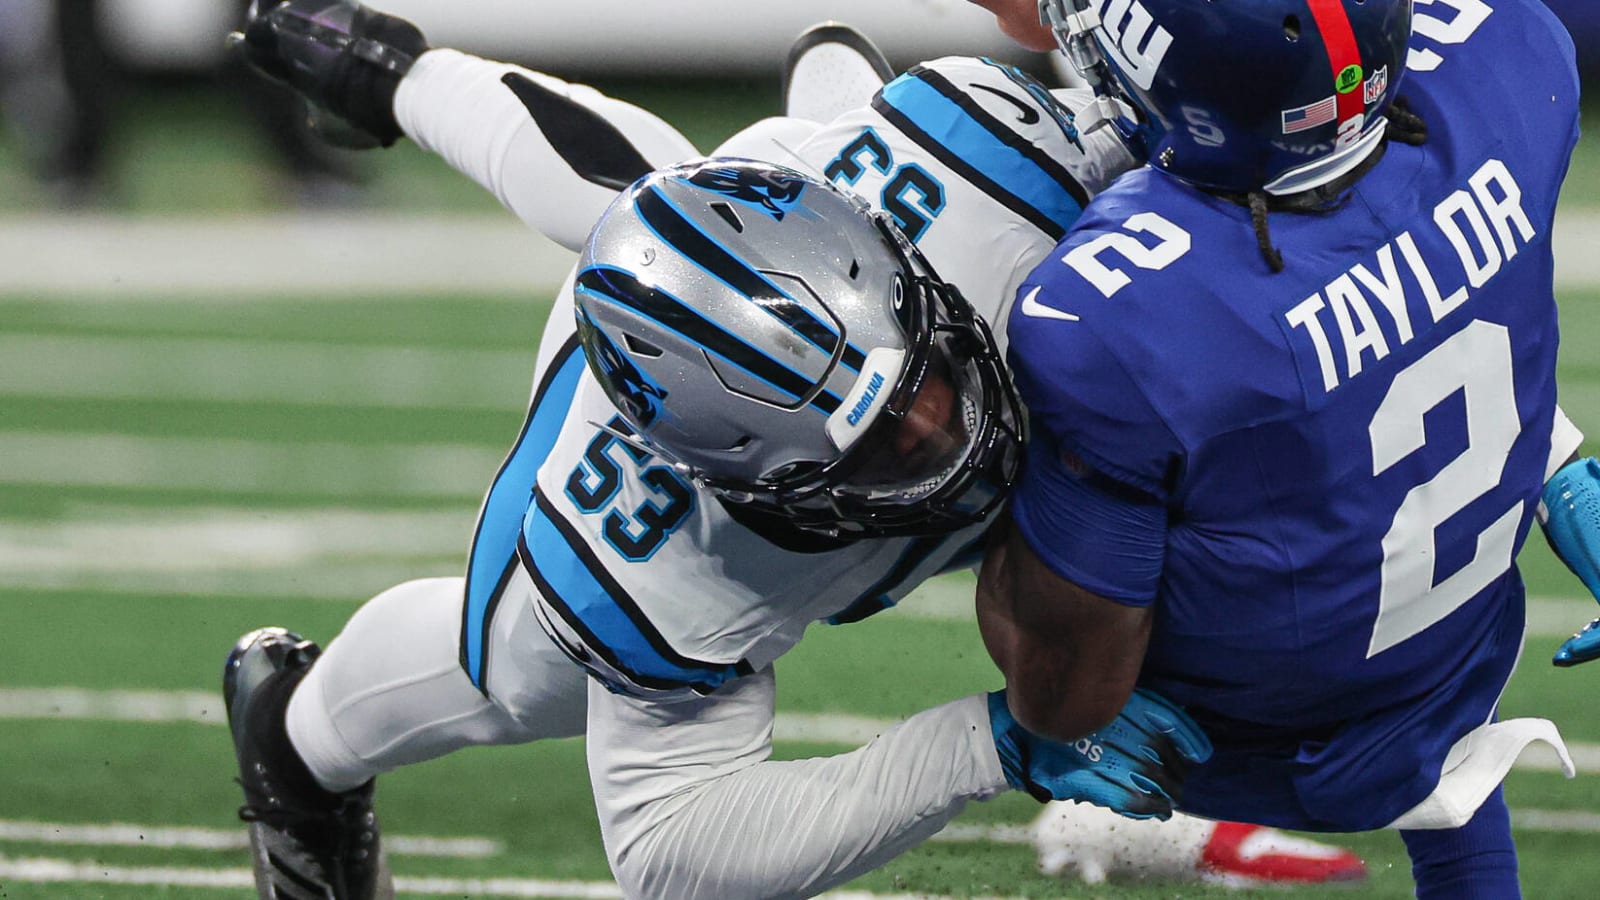 Panthers promote former Pro Bowl LB to active roster